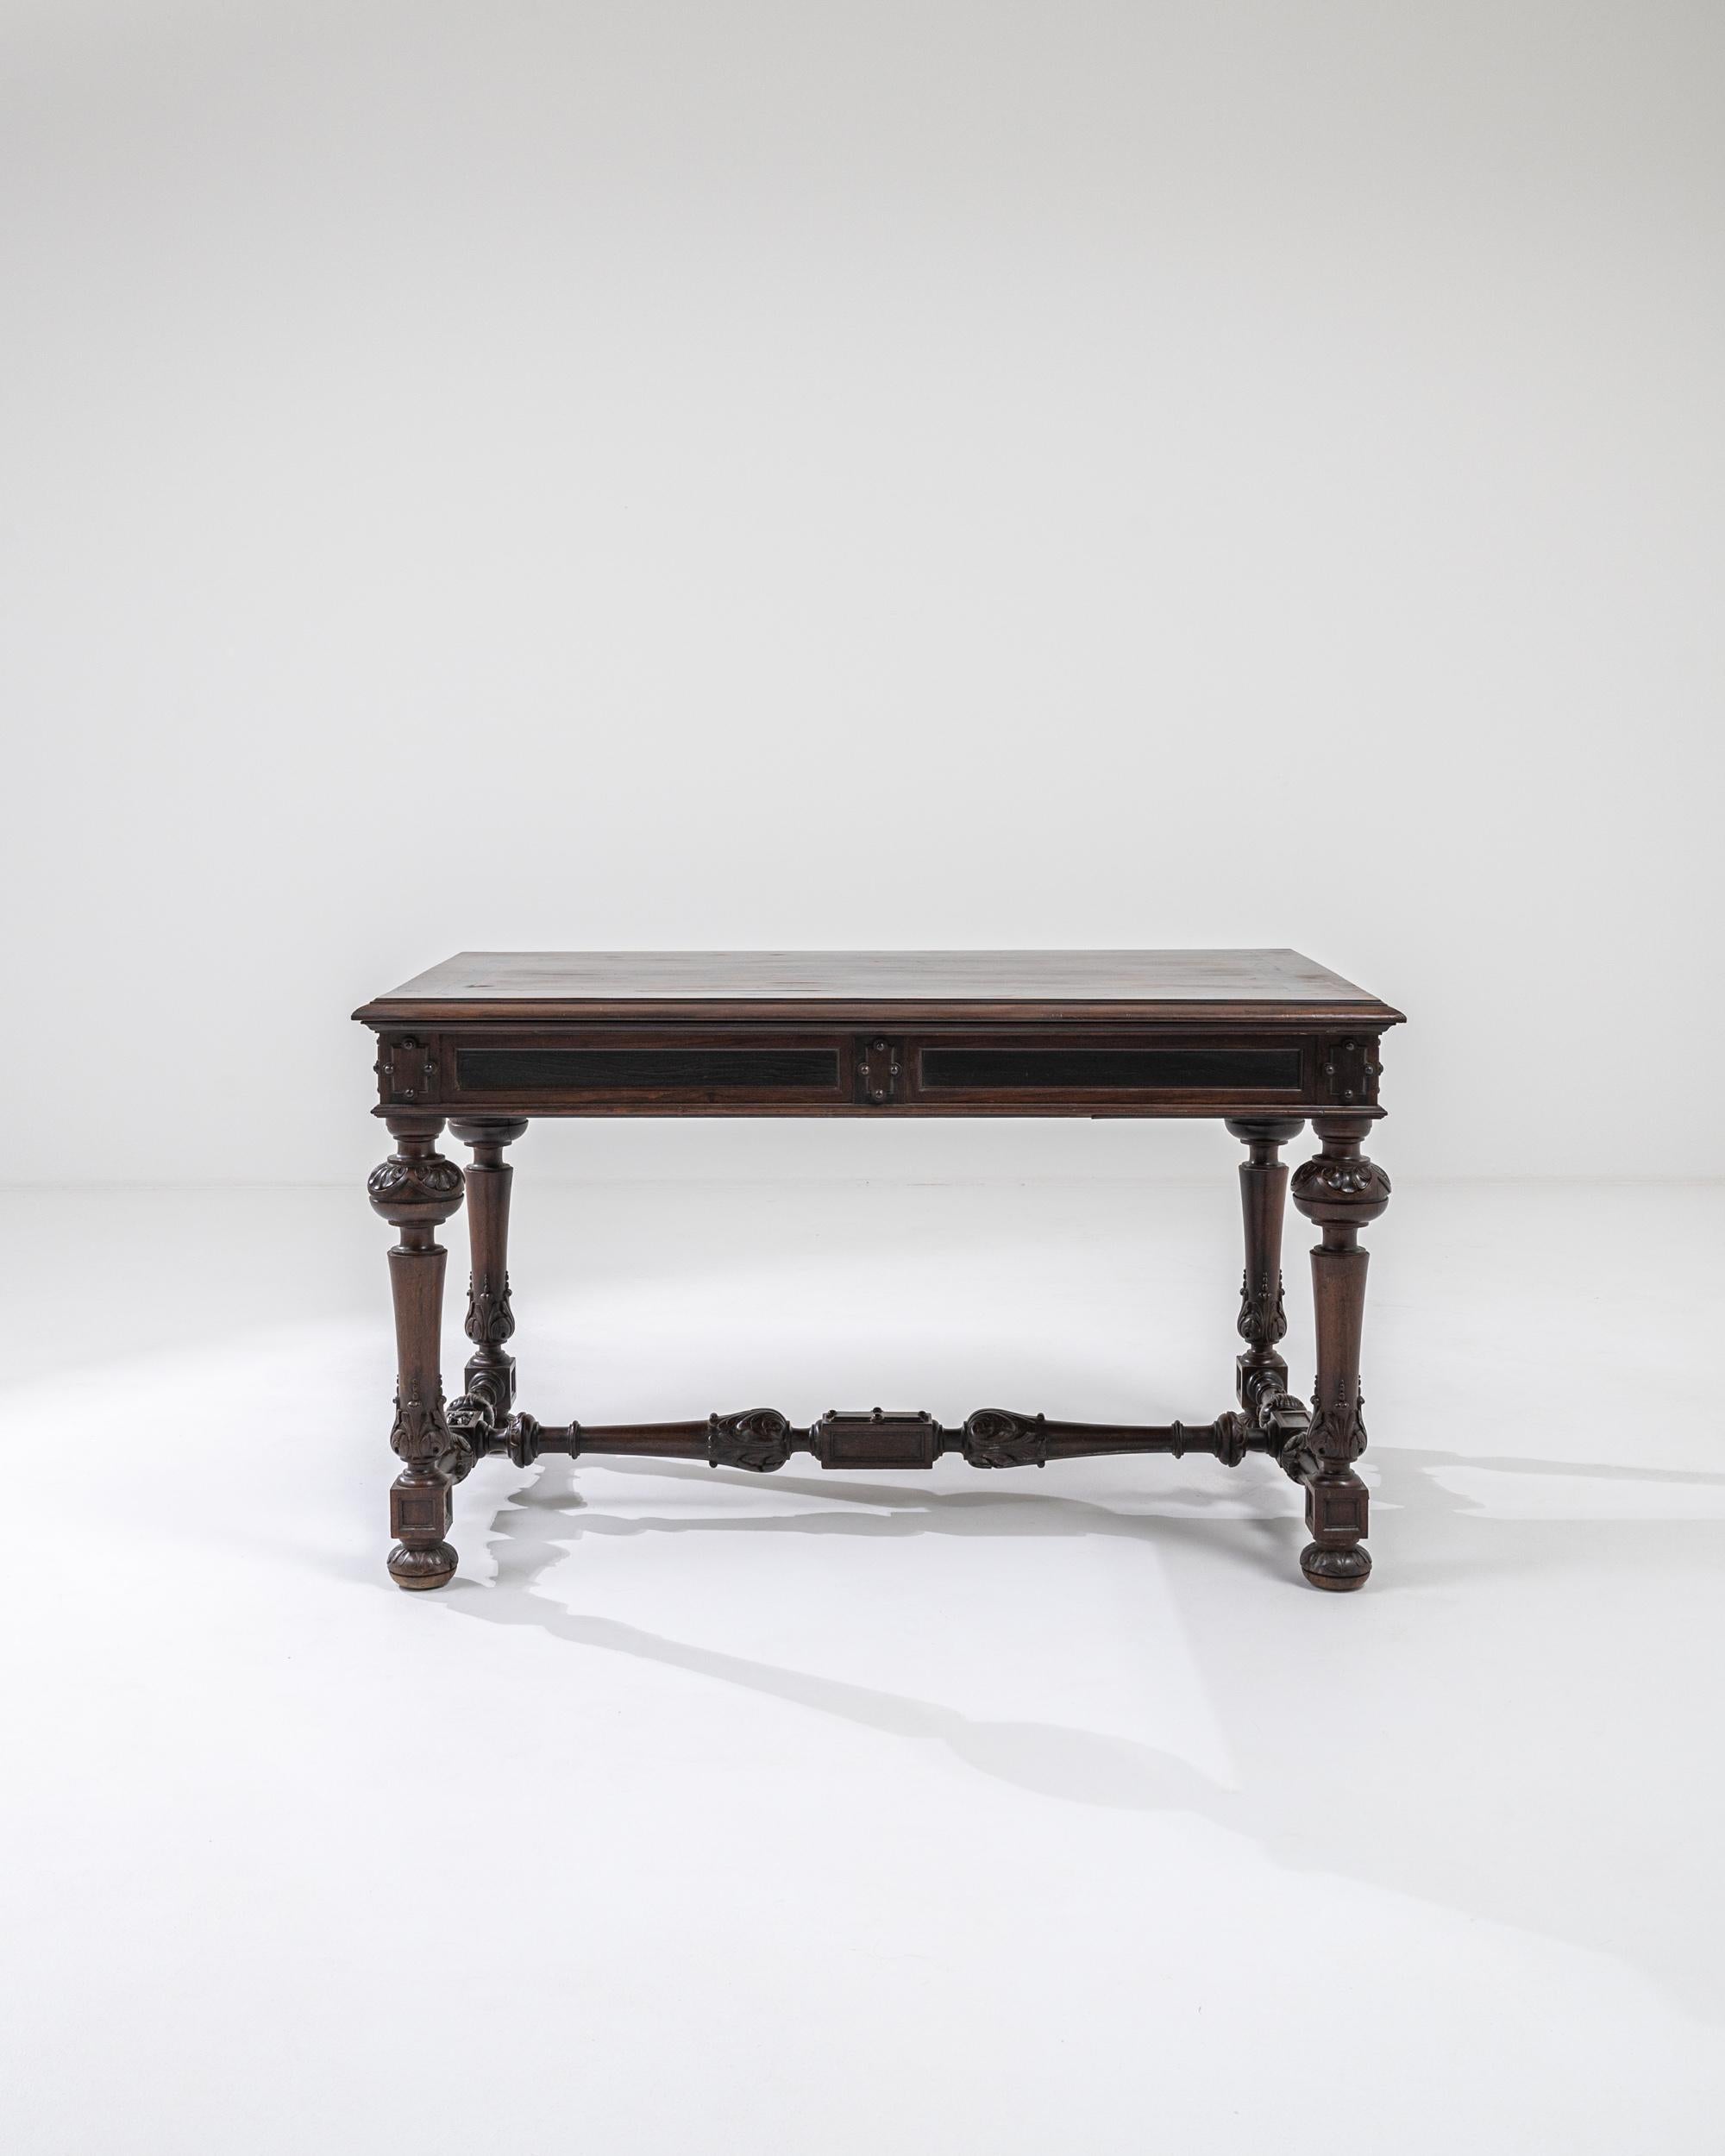 A wooden table from 19th century France. Sumptuously hand-carved details line this table’s aprons and shape the contours of its legs, creating a dazzling display of fastidious craftsmanship. Two sliding drawers extend from either end of the table,